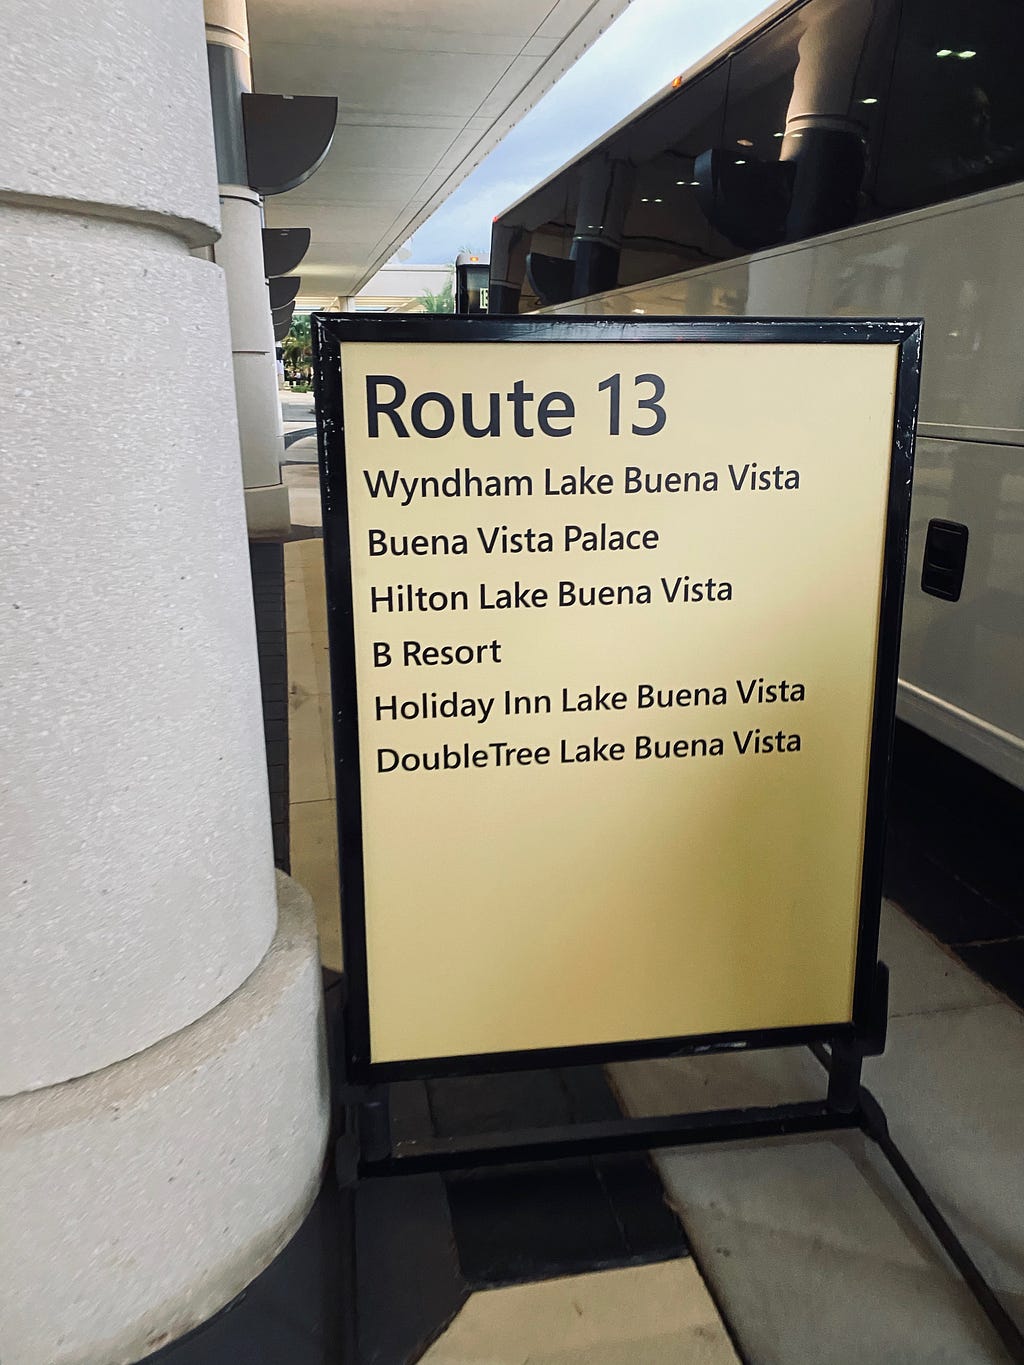 Hotel routes sign